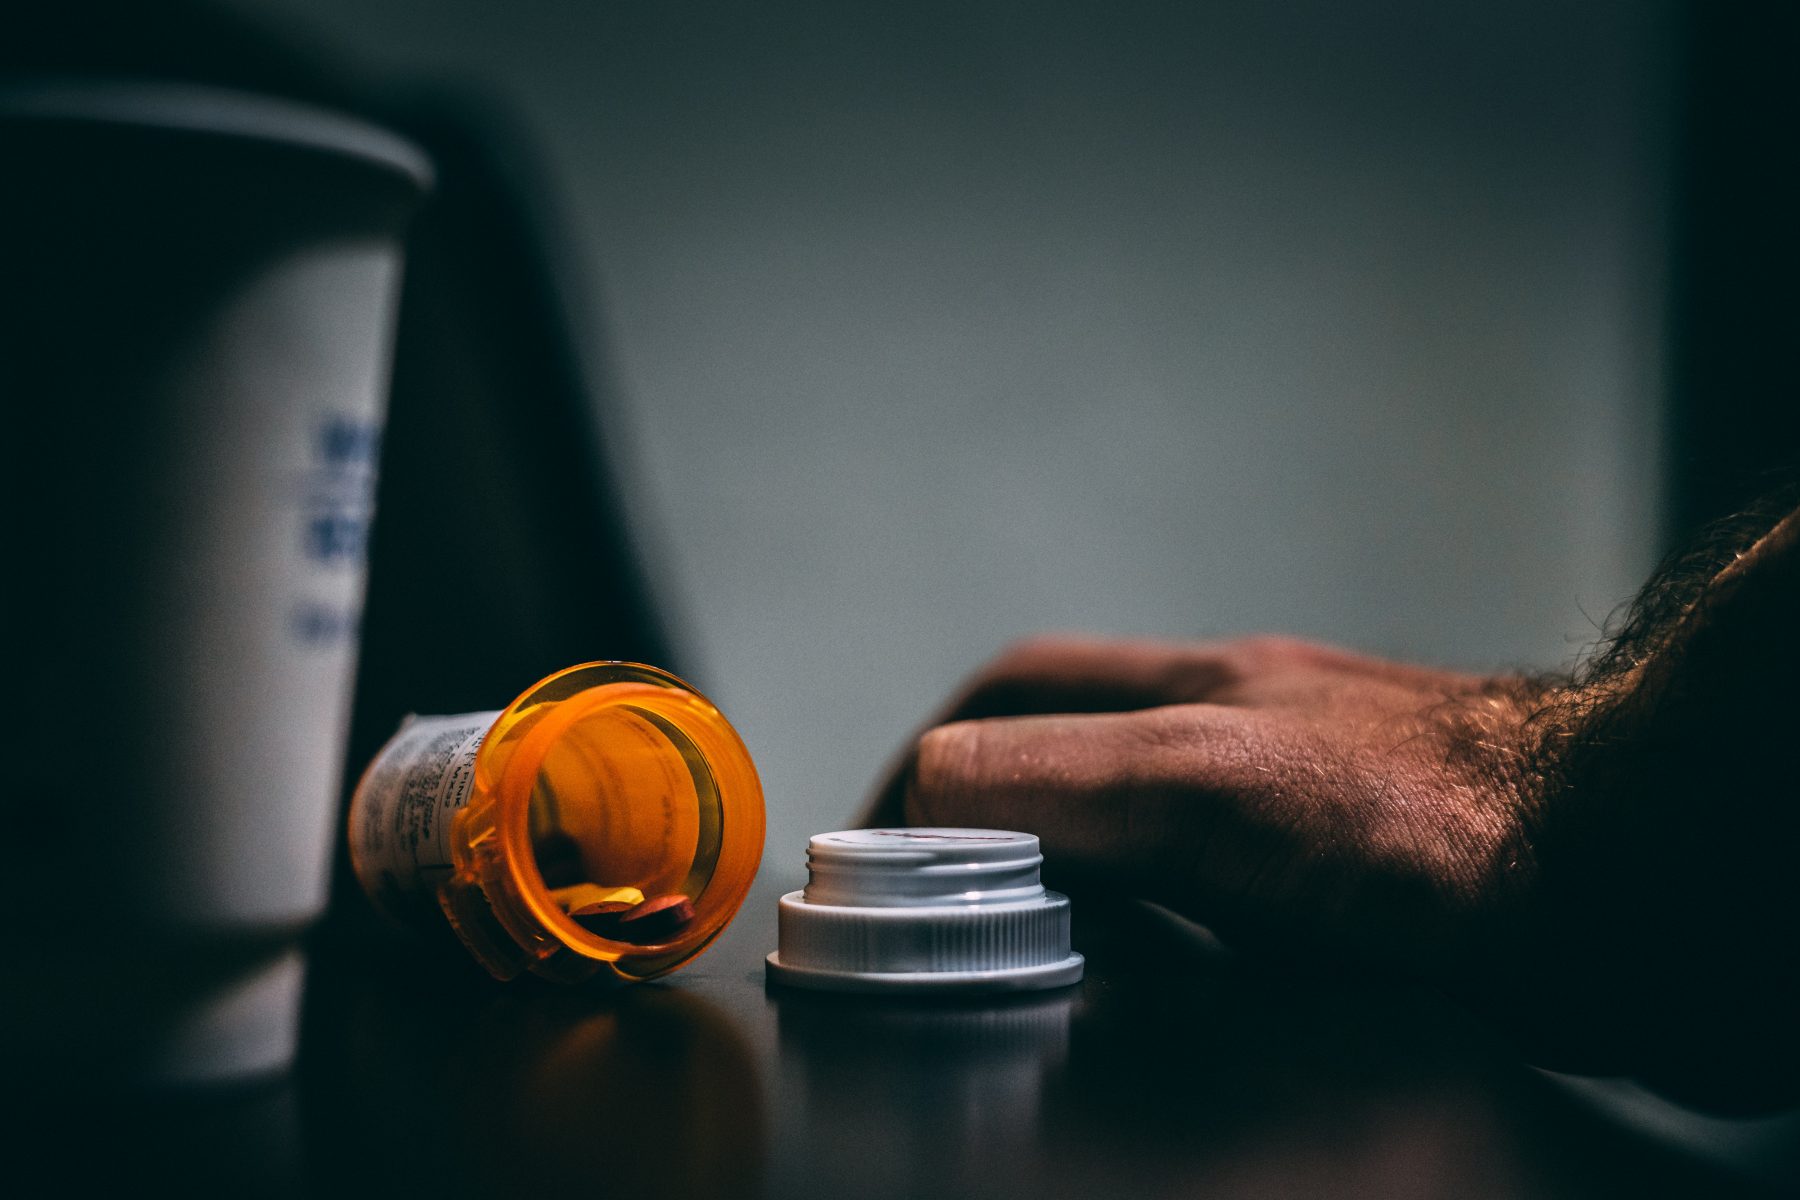 A spilled pill bottle next to a cup and a hand.